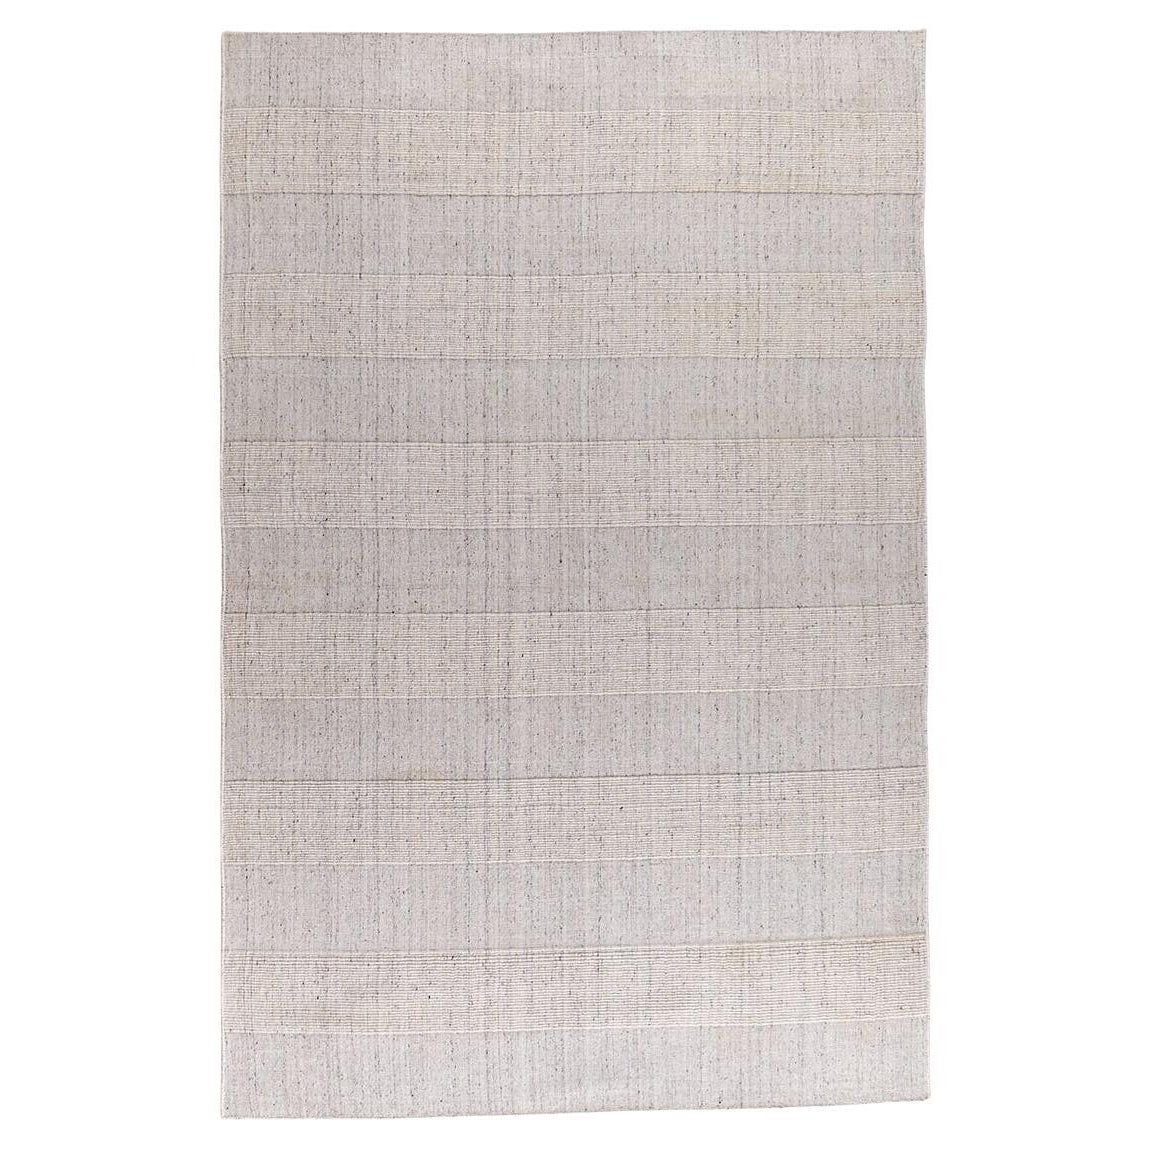 Hand-Woven 'Mithun' Rug: Sustainable, Eco-Friendly Wool Mix in 300 x 400 cm For Sale